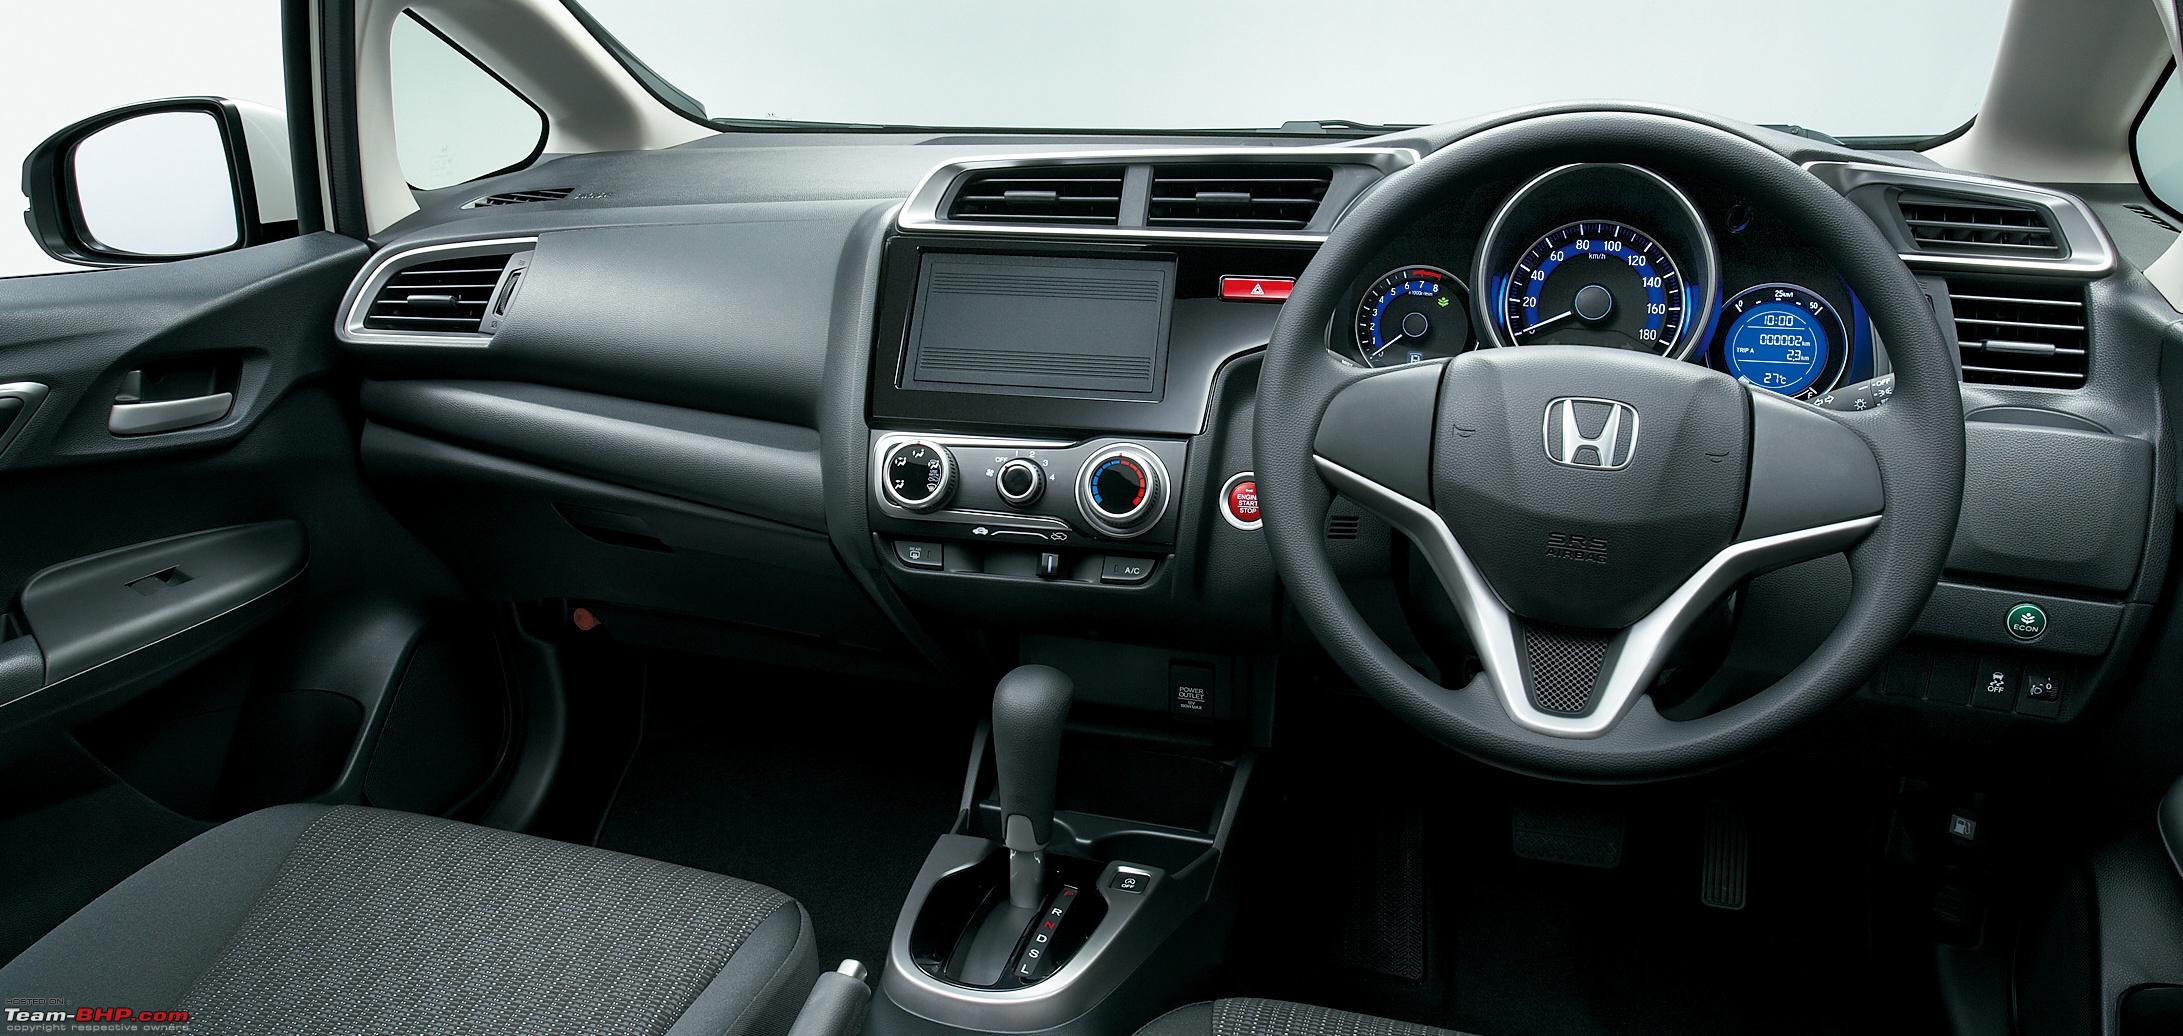 Honda Fit 2020 Prices In Pakistan Pictures Reviews